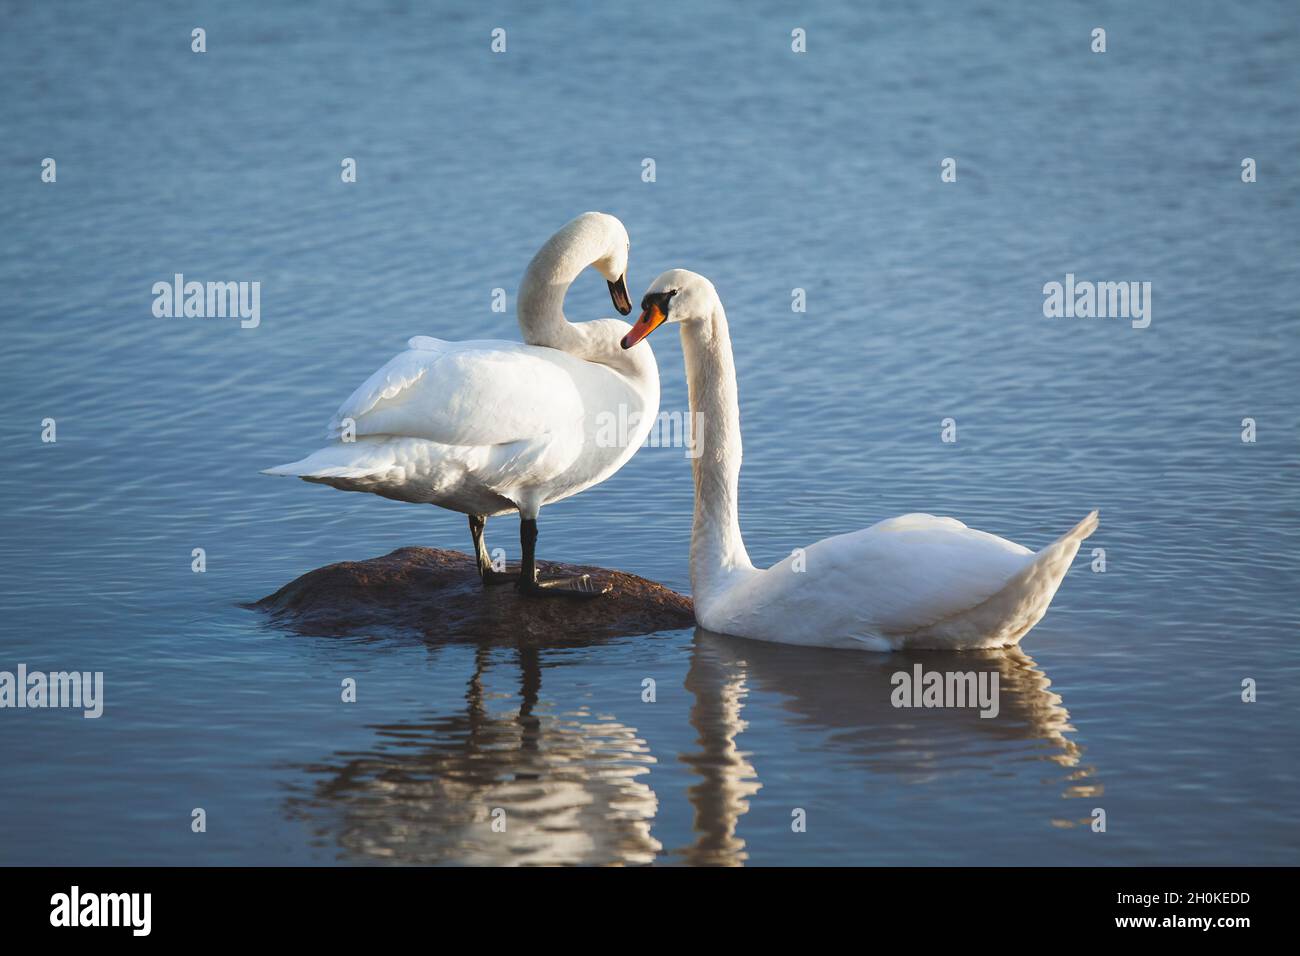 Mute swan couple in water together. Blue water and reflections. Cygnus olor. Stock Photo